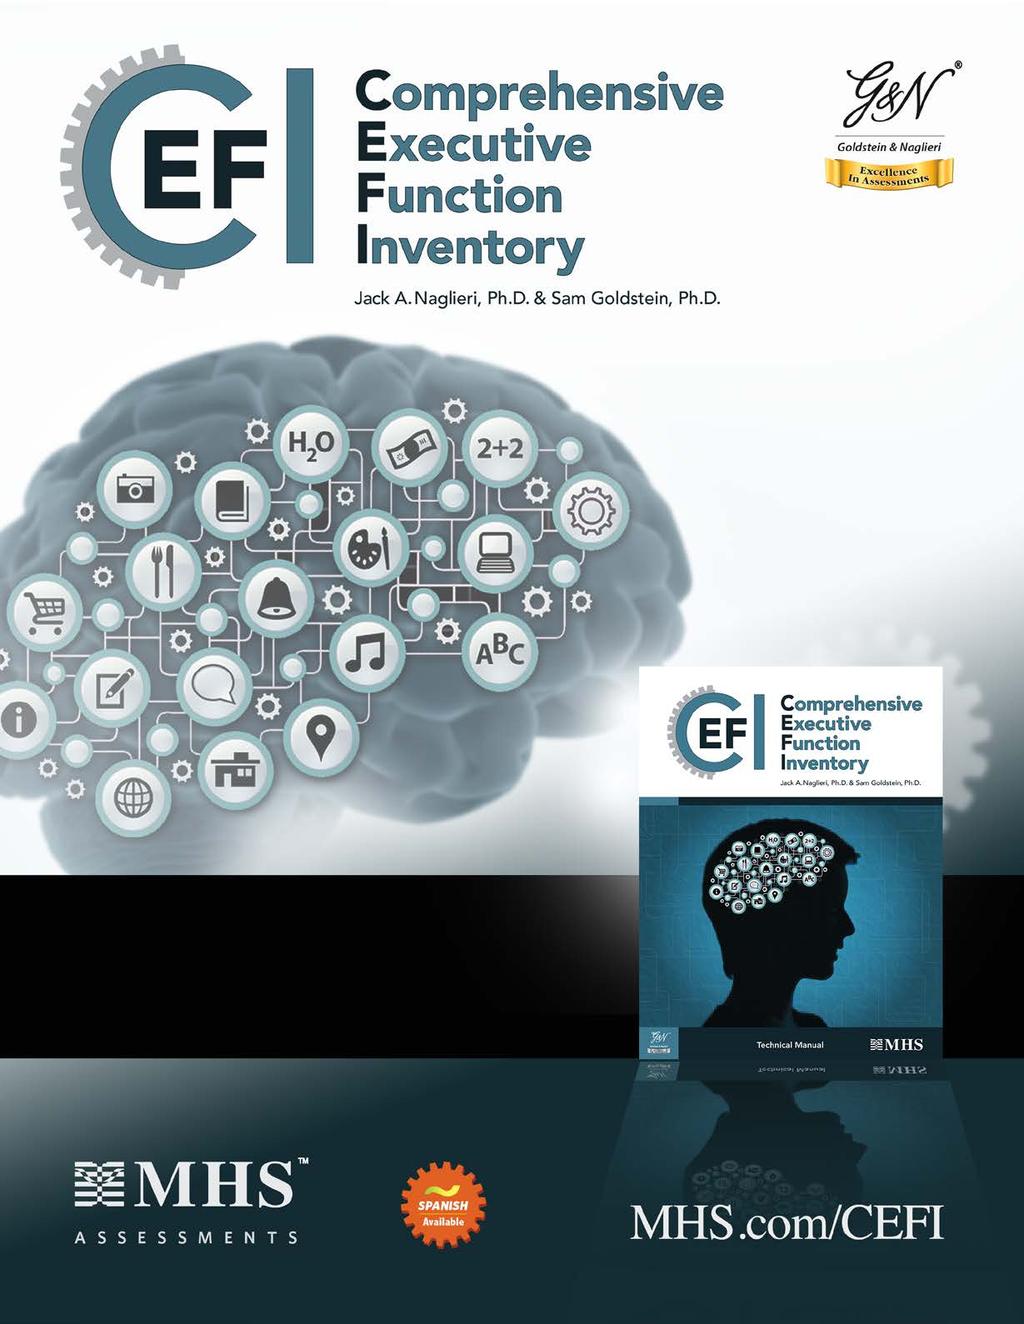 Provides a Comprehensive Evaluation of Executive Function Strengths and